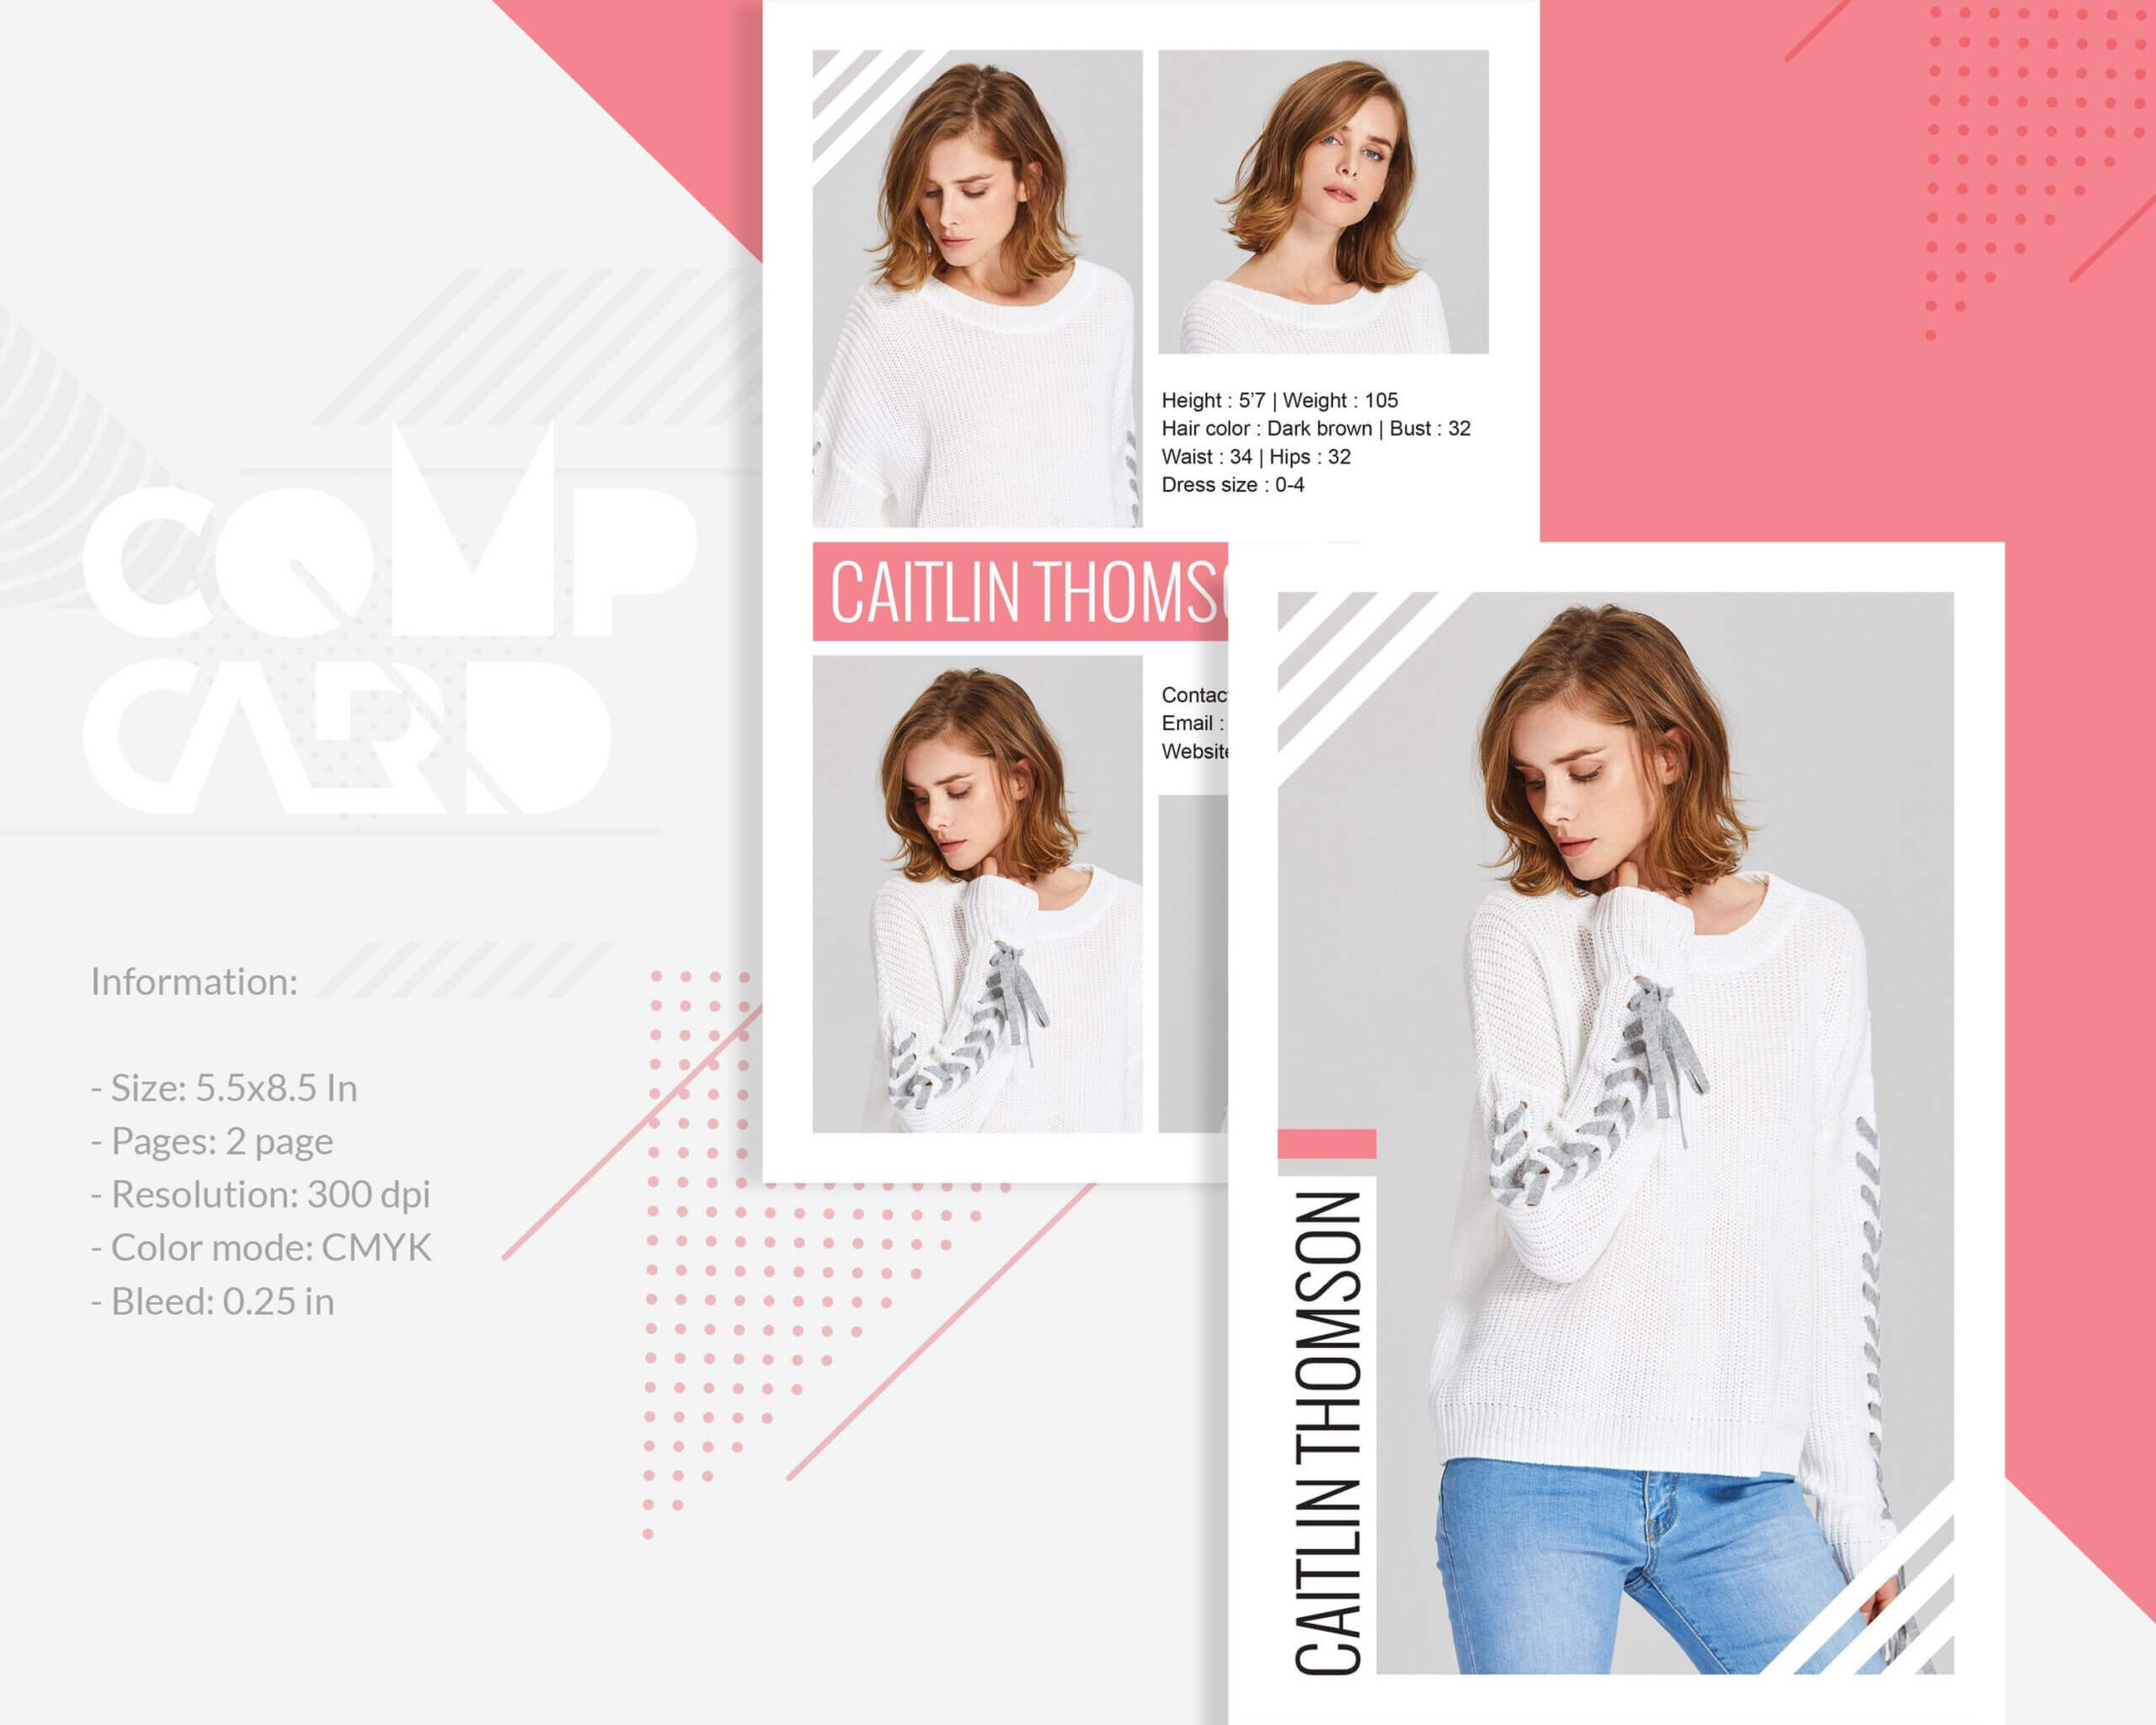 Modeling Comp Card | Fashion Model Comp Card Template In Comp Card Template Download